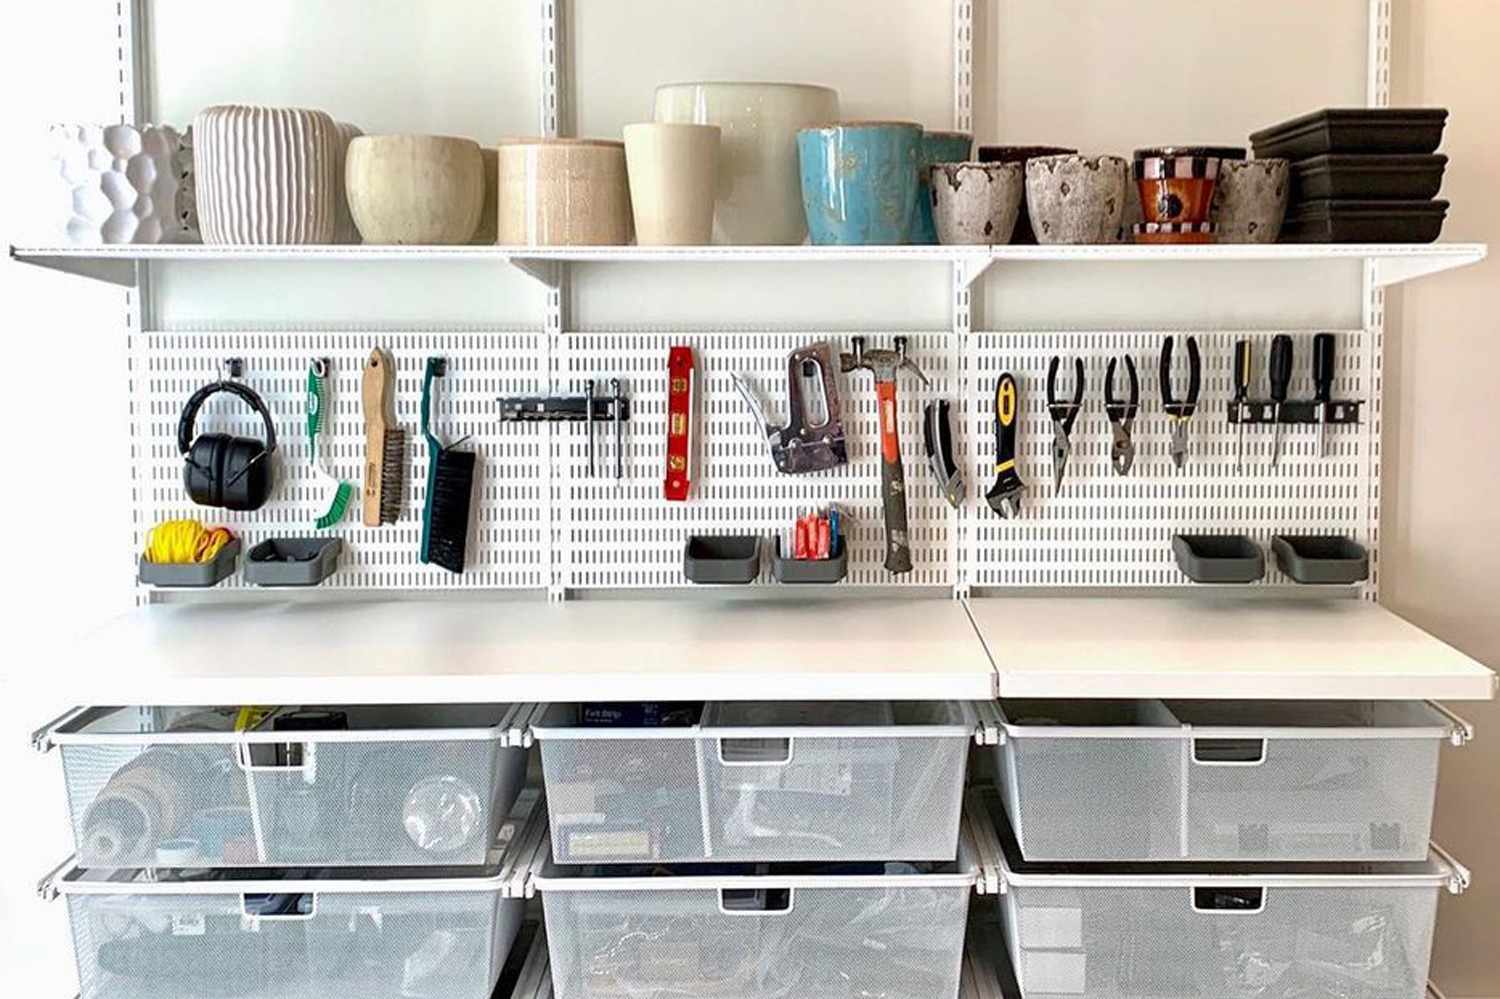 DIY Garage Shelves: Organize Your Space With These Simple Steps